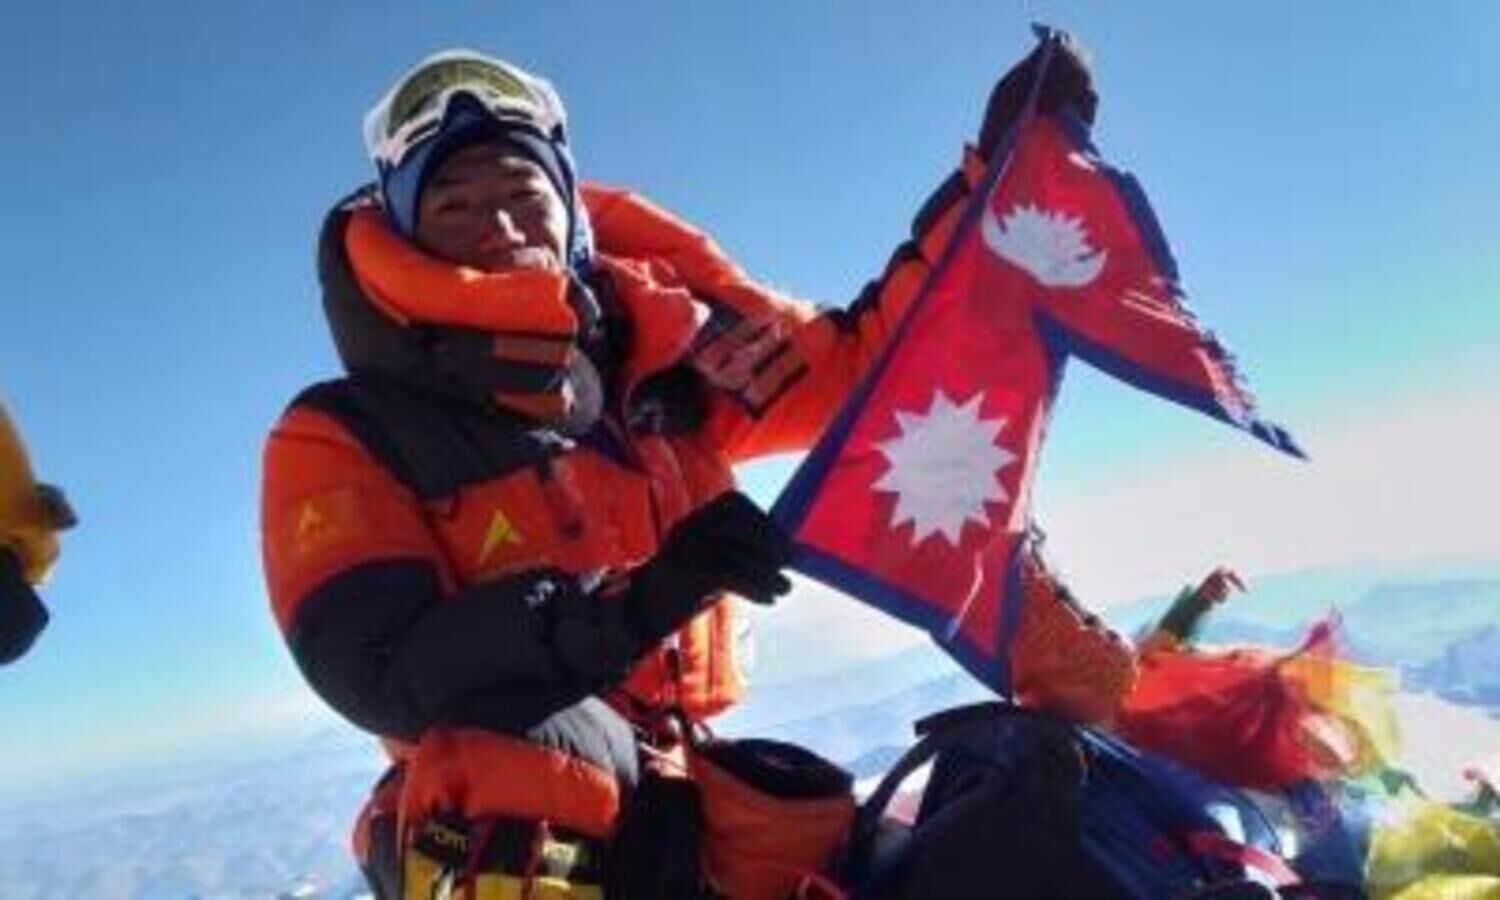 Kami Rita Sherpa Sets New Record with 28th Ascent of Everest